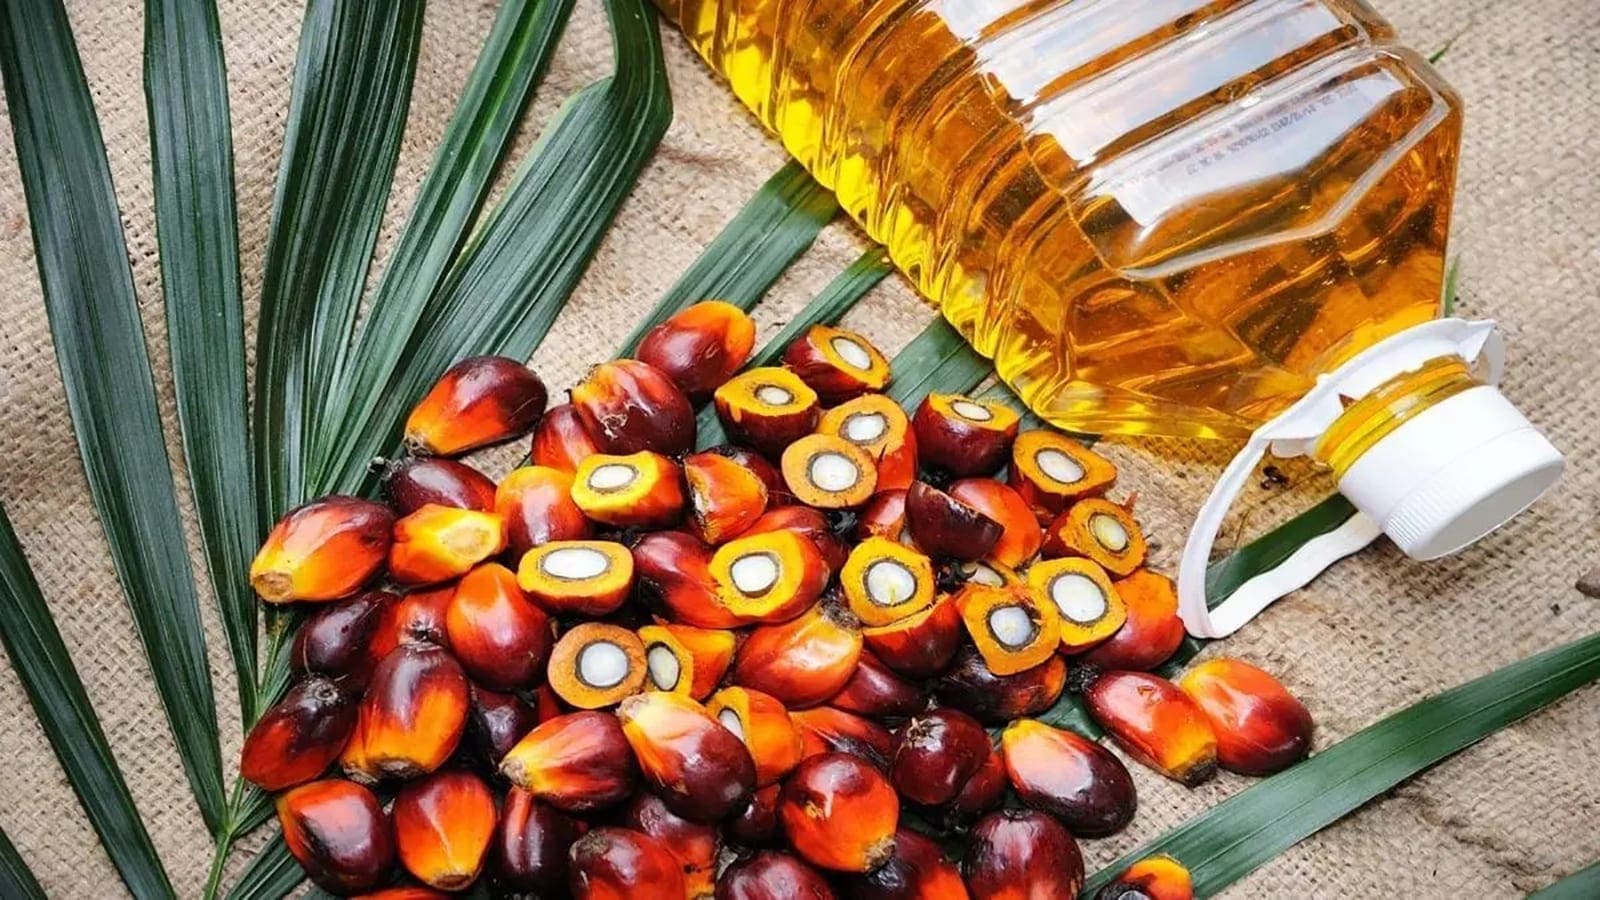 Nigeria’s palm oil industry surges, emerges as Africa’s premier palm oil consumer